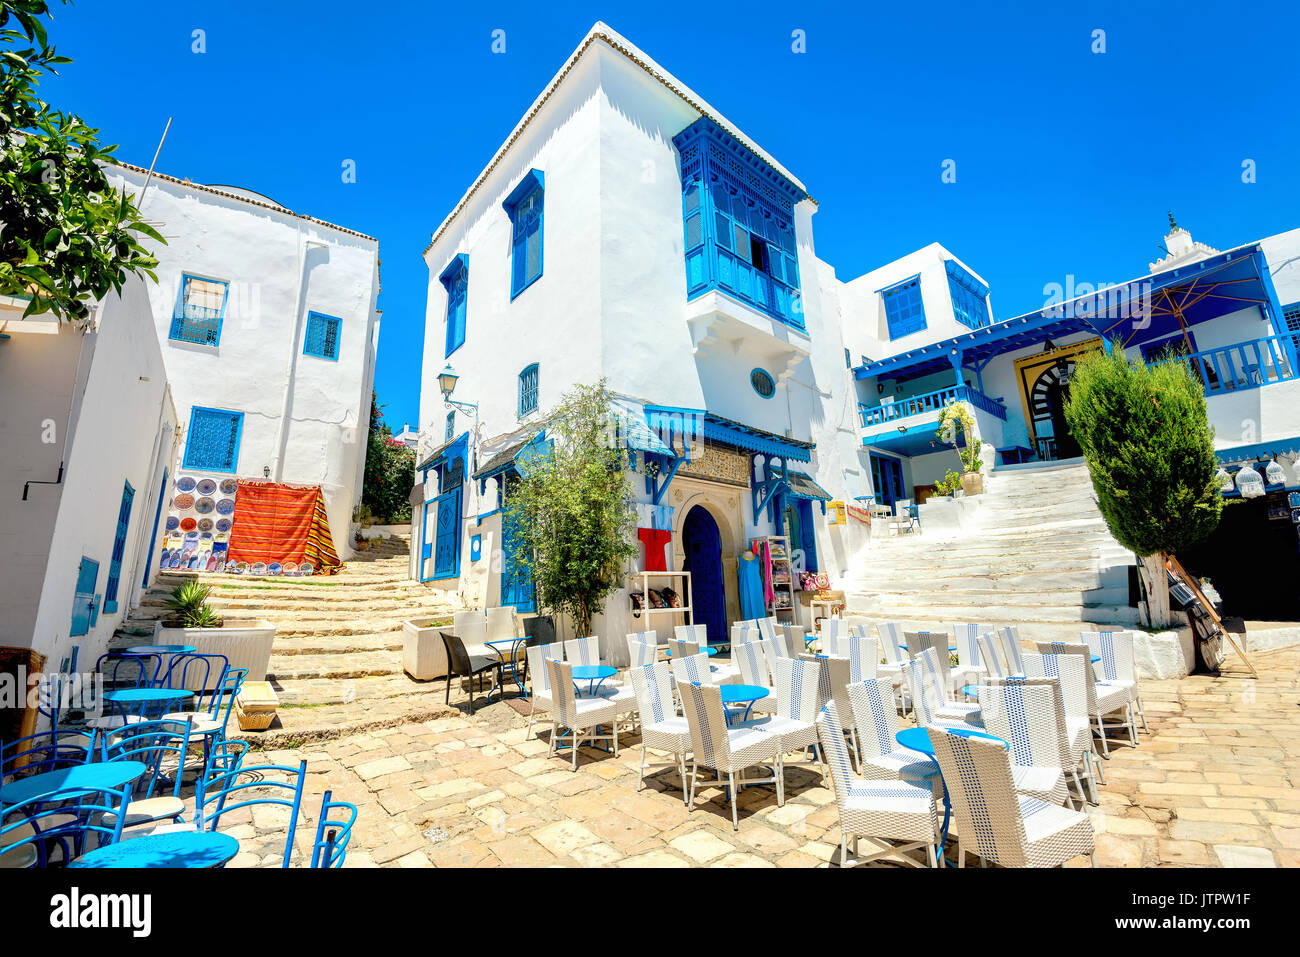 Cityscape with typical white blue colored houses in resort town Sidi Bou Said. Tunisia, North Africa Stock Photo